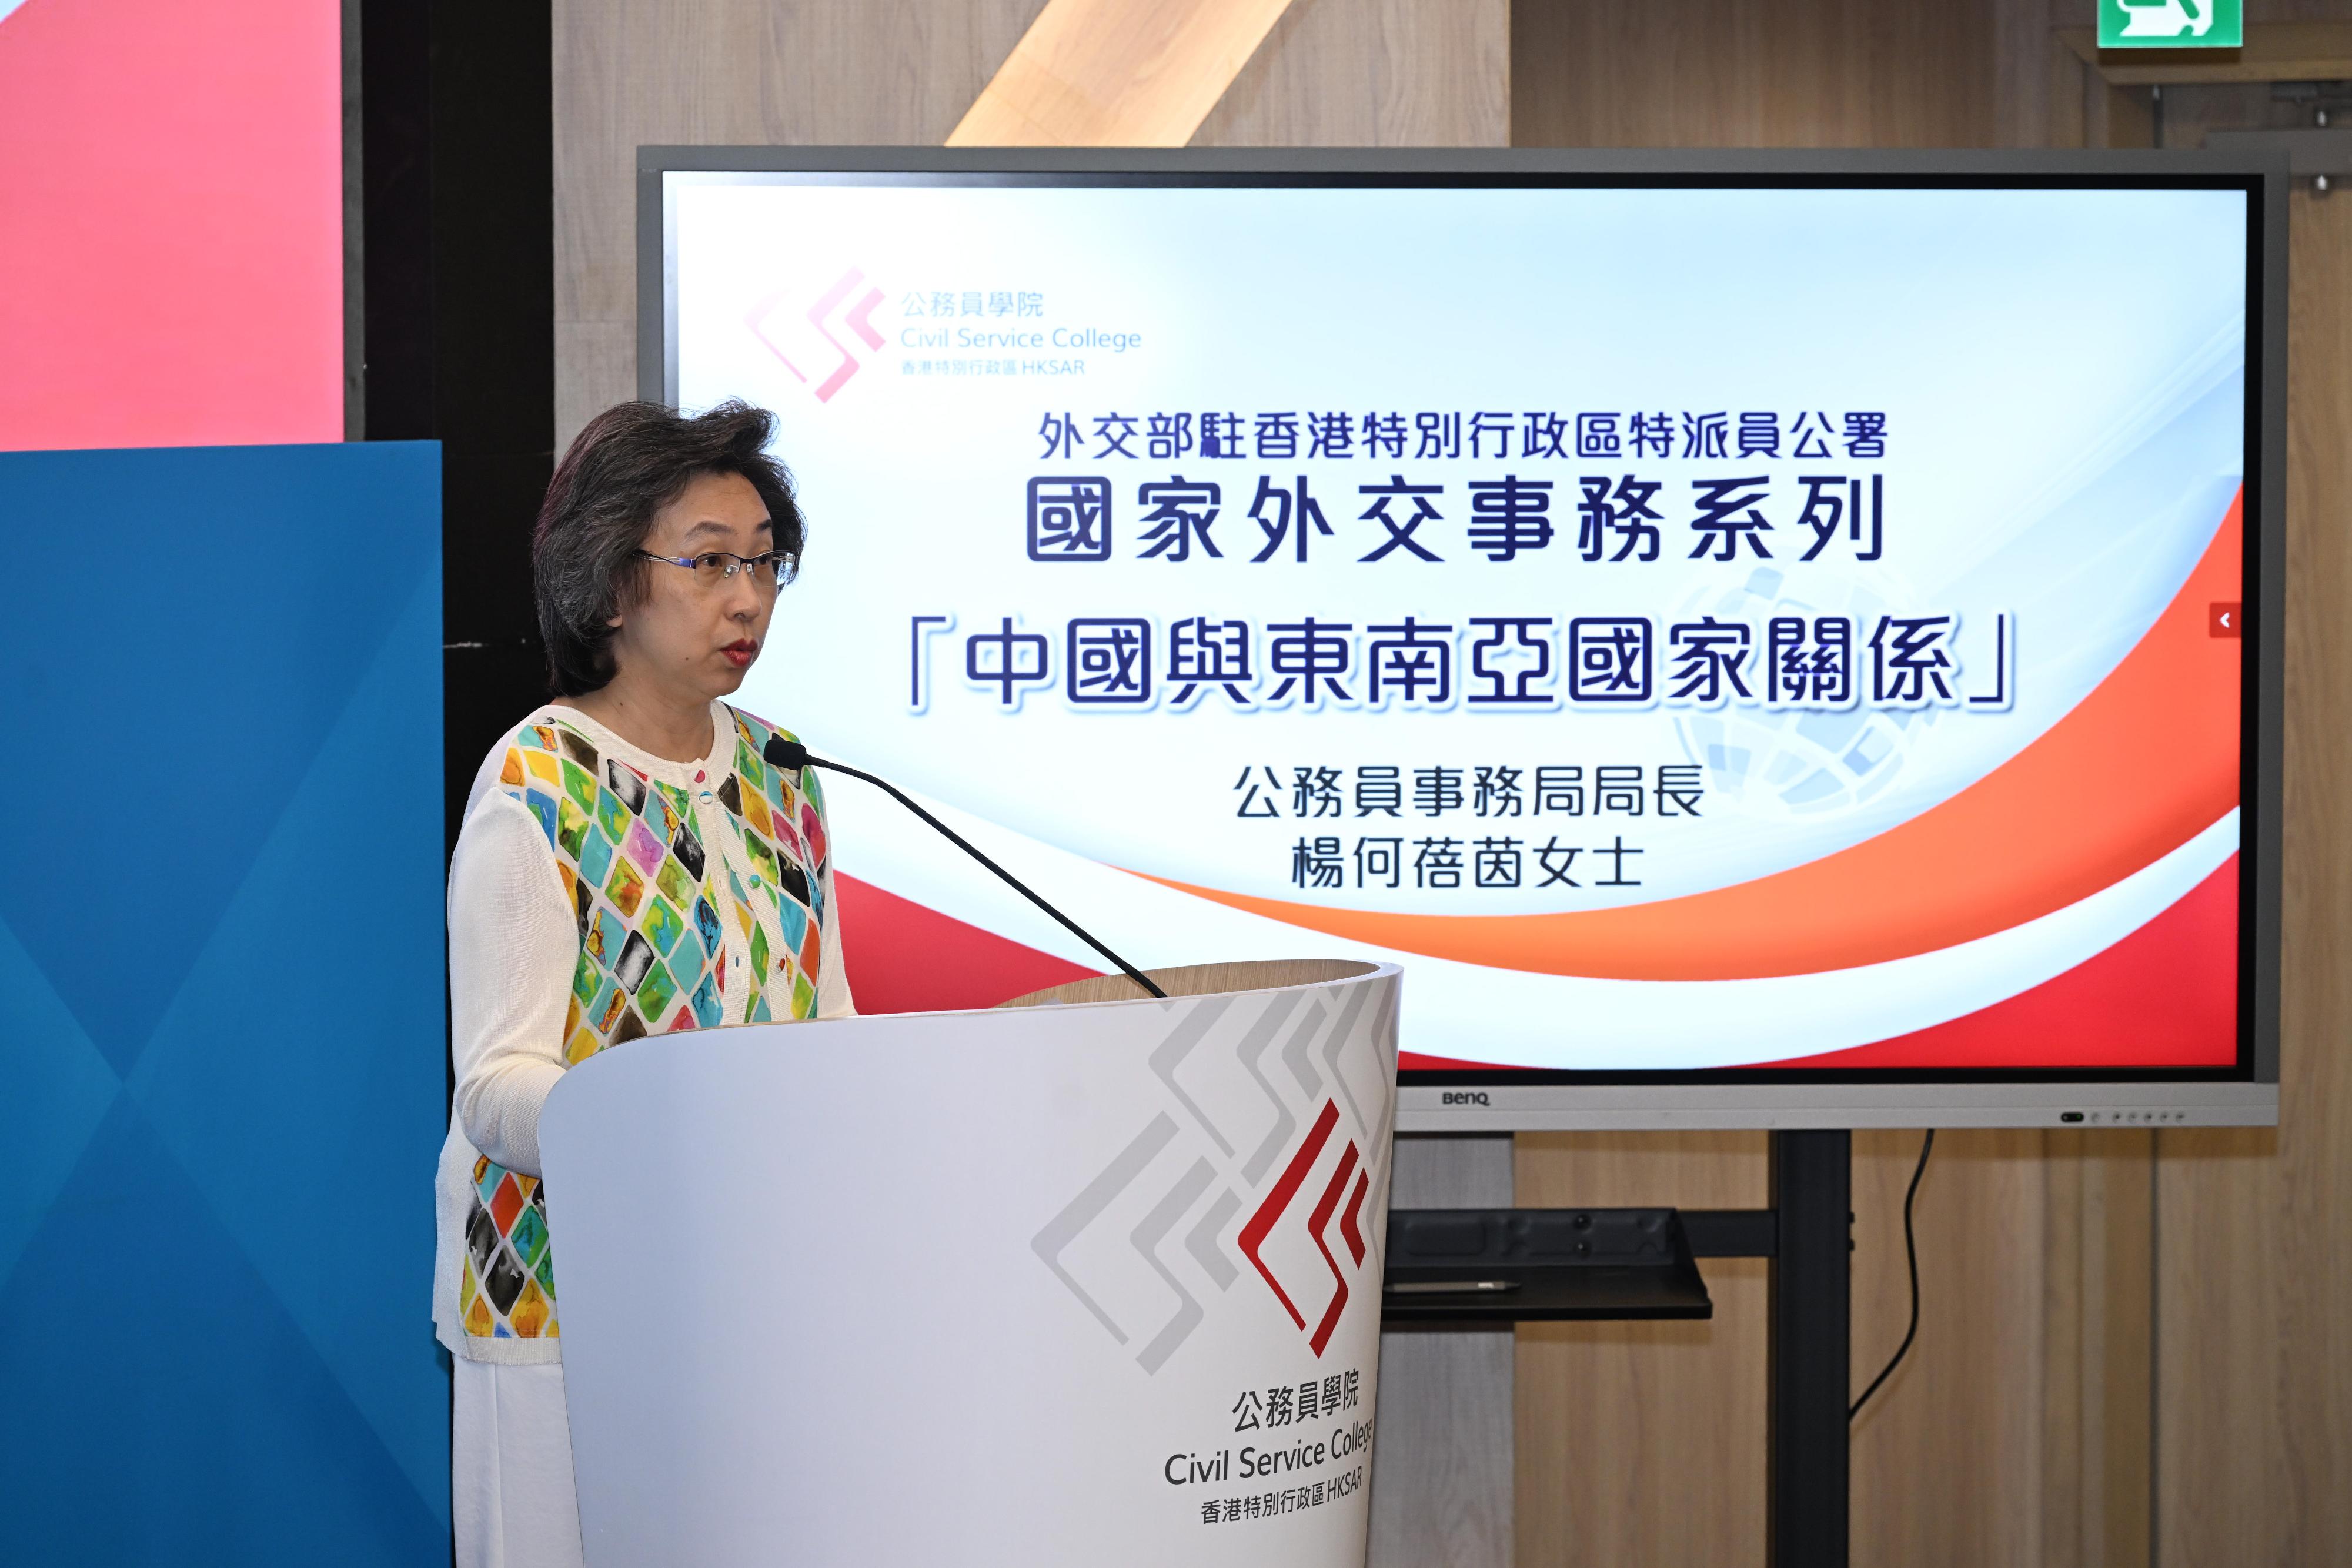 The Civil Service College today (August 28) held a talk of the series on the country's foreign affairs jointly with the Office of the Commissioner of the Ministry of Foreign Affairs in the Hong Kong Special Administrative Region, on the topic of "China's Relations with Southeast Asian Countries". Photo shows the Secretary for the Civil Service, Mrs Ingrid Yeung, delivering a speech at the talk.